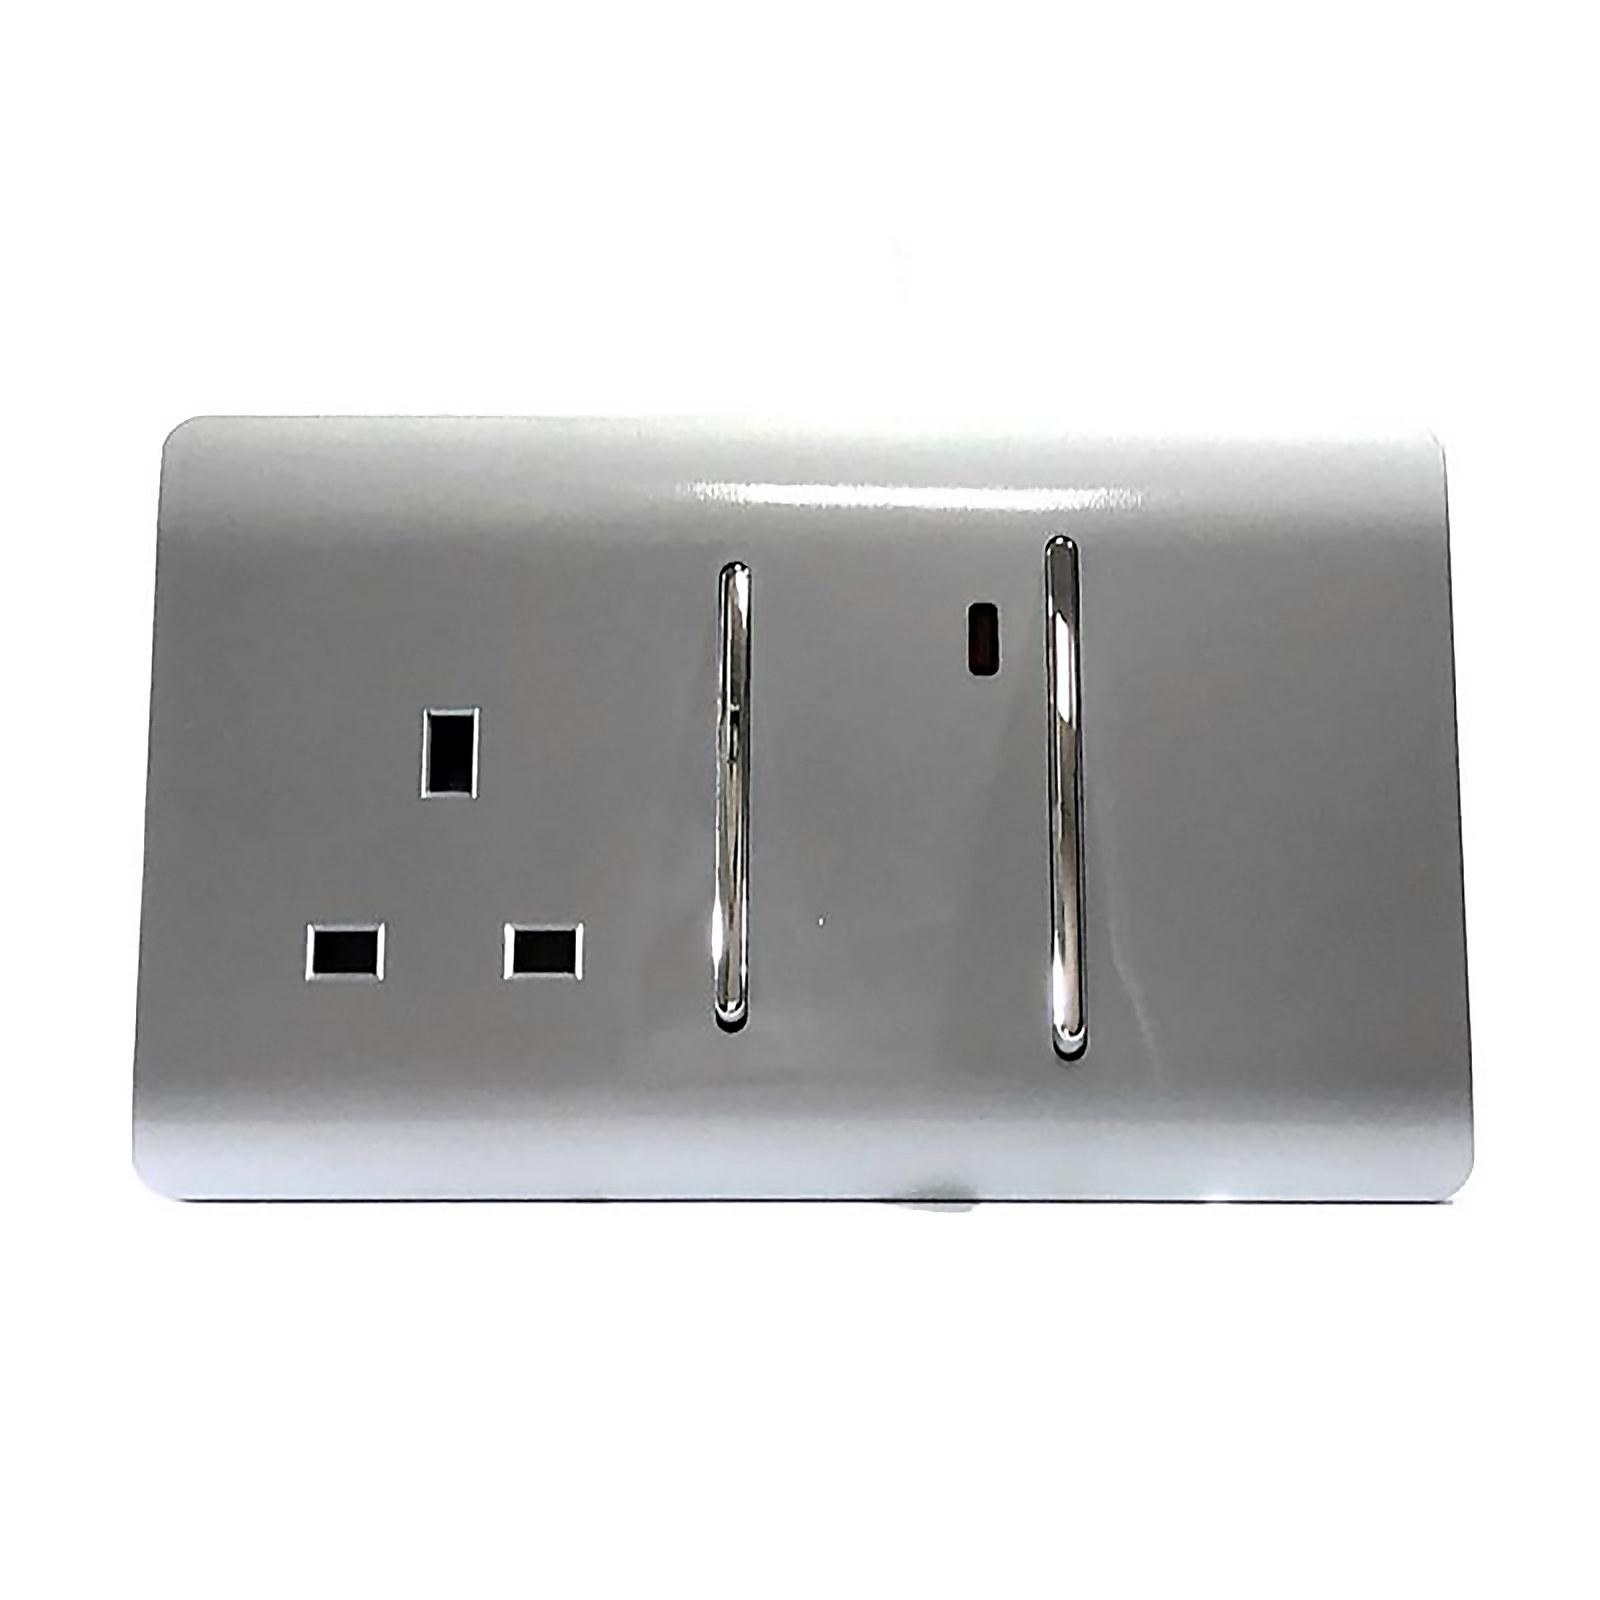 Trendi Artistic Modern 45 A Cooker Switch Inc Plug Socket and Neon Insert Stainless Silver